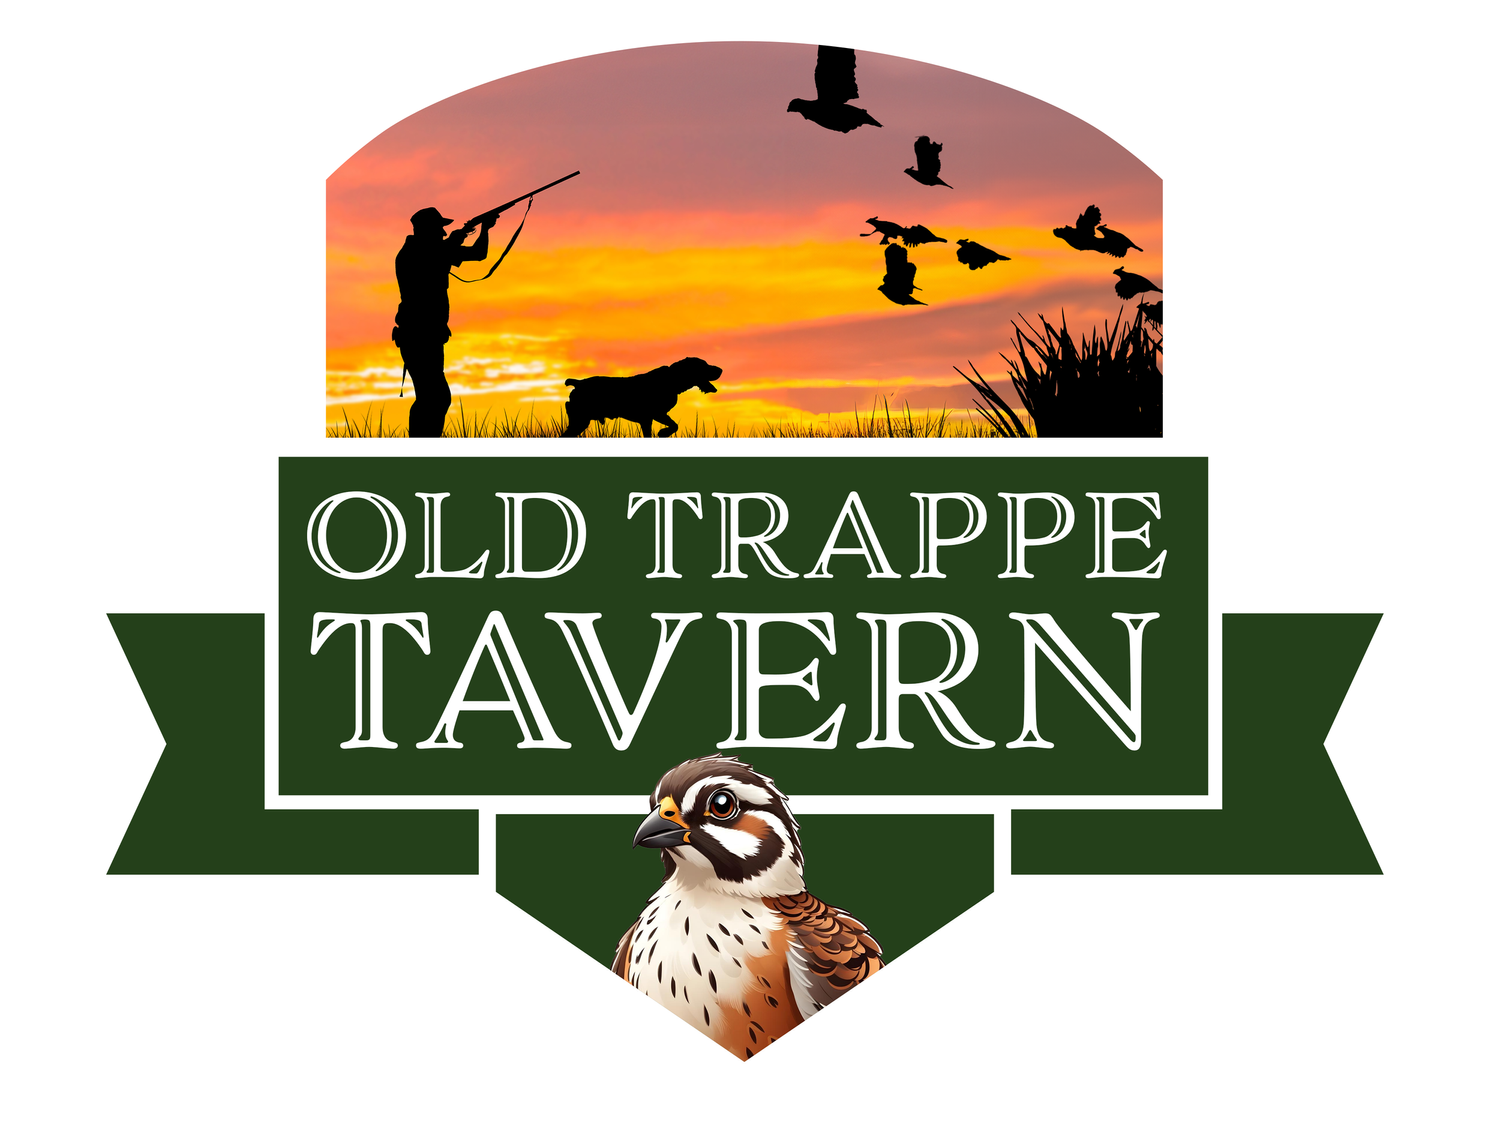 Old Trappe Tavern